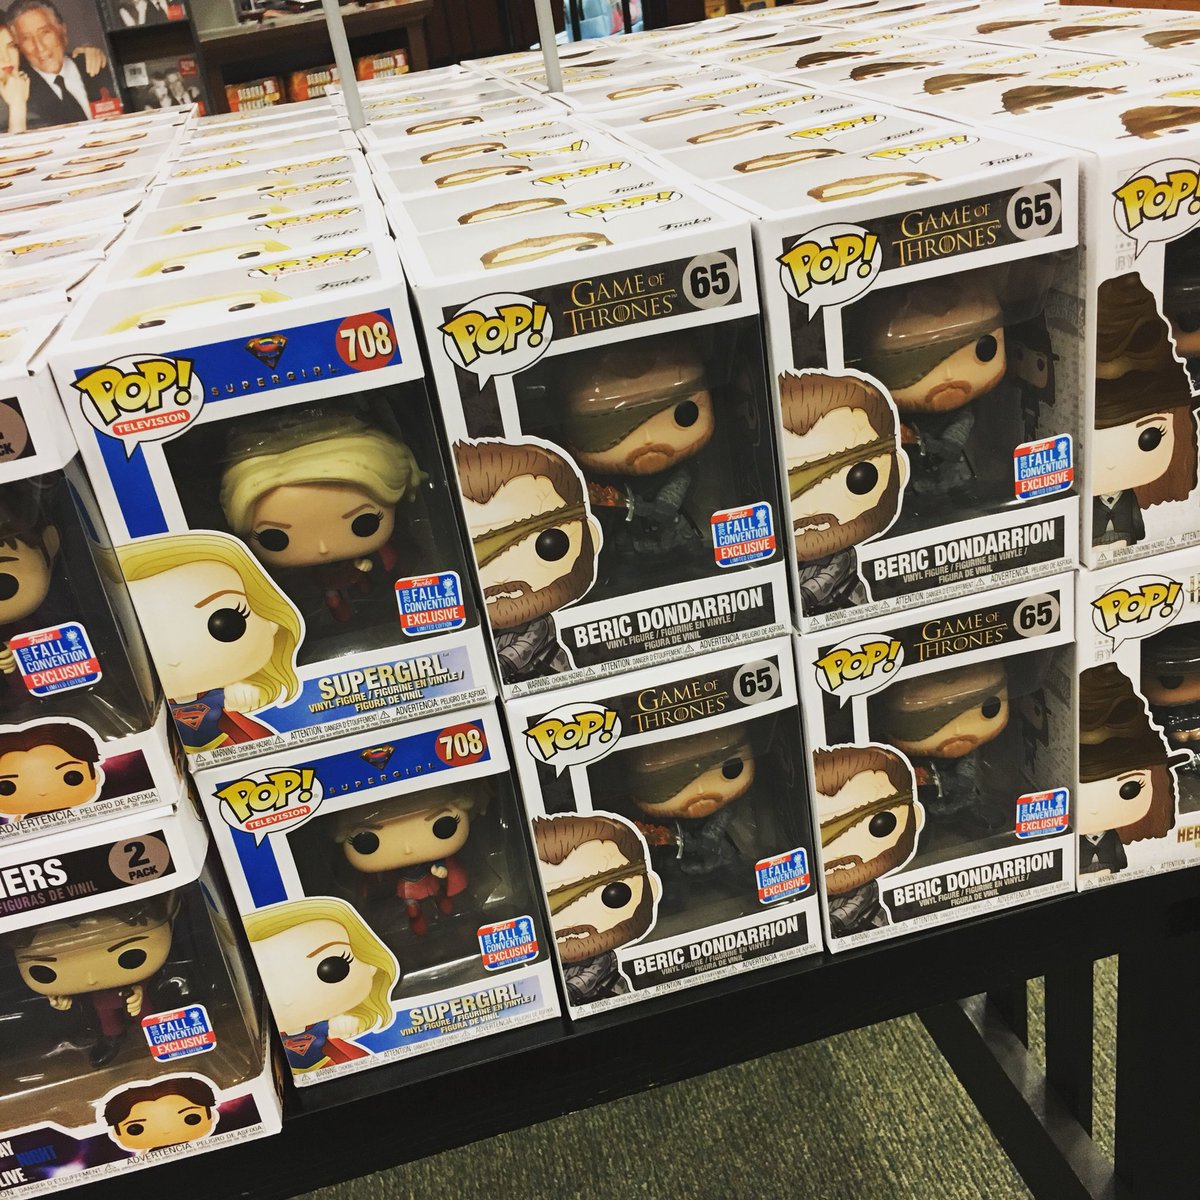 #nyccc #funko #funkopop #exclusives are in! #limitedquantities #got #supergirl #hp #snl #bnseattle #morethanjustabookstore #feedthegeek #collectibles